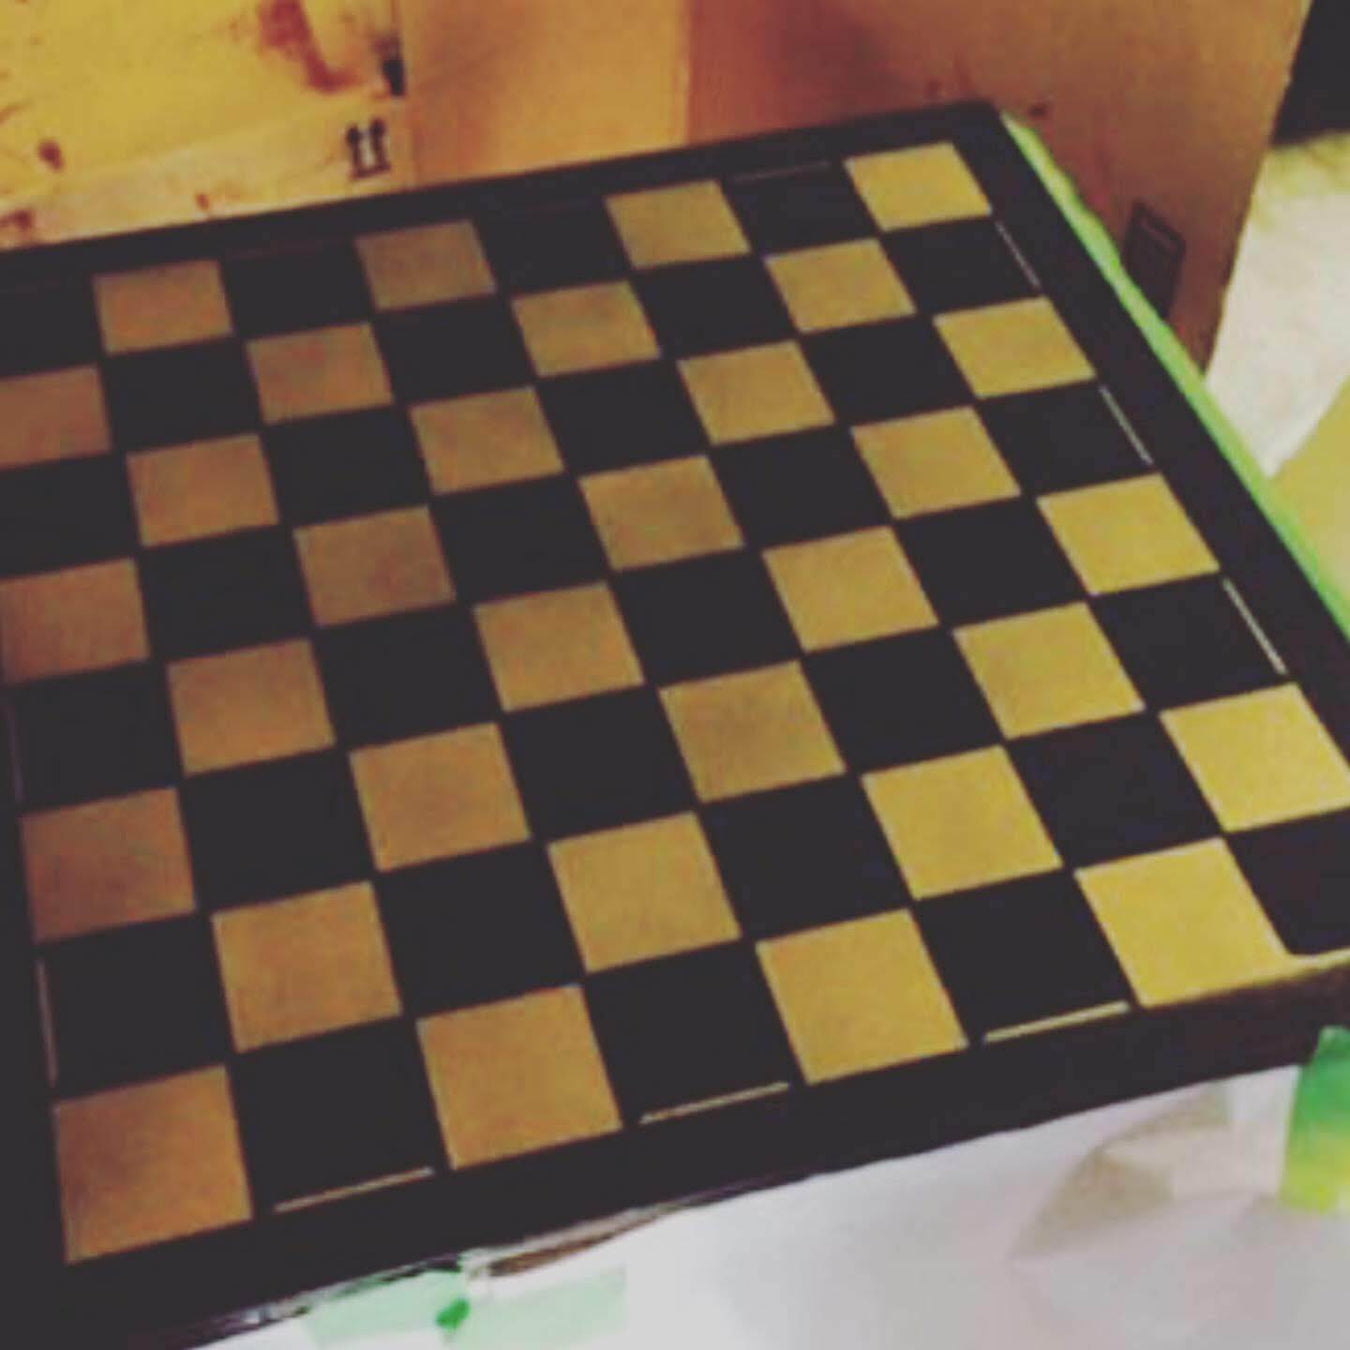 checkered chessboard pattern painted on a square table using paint stencil